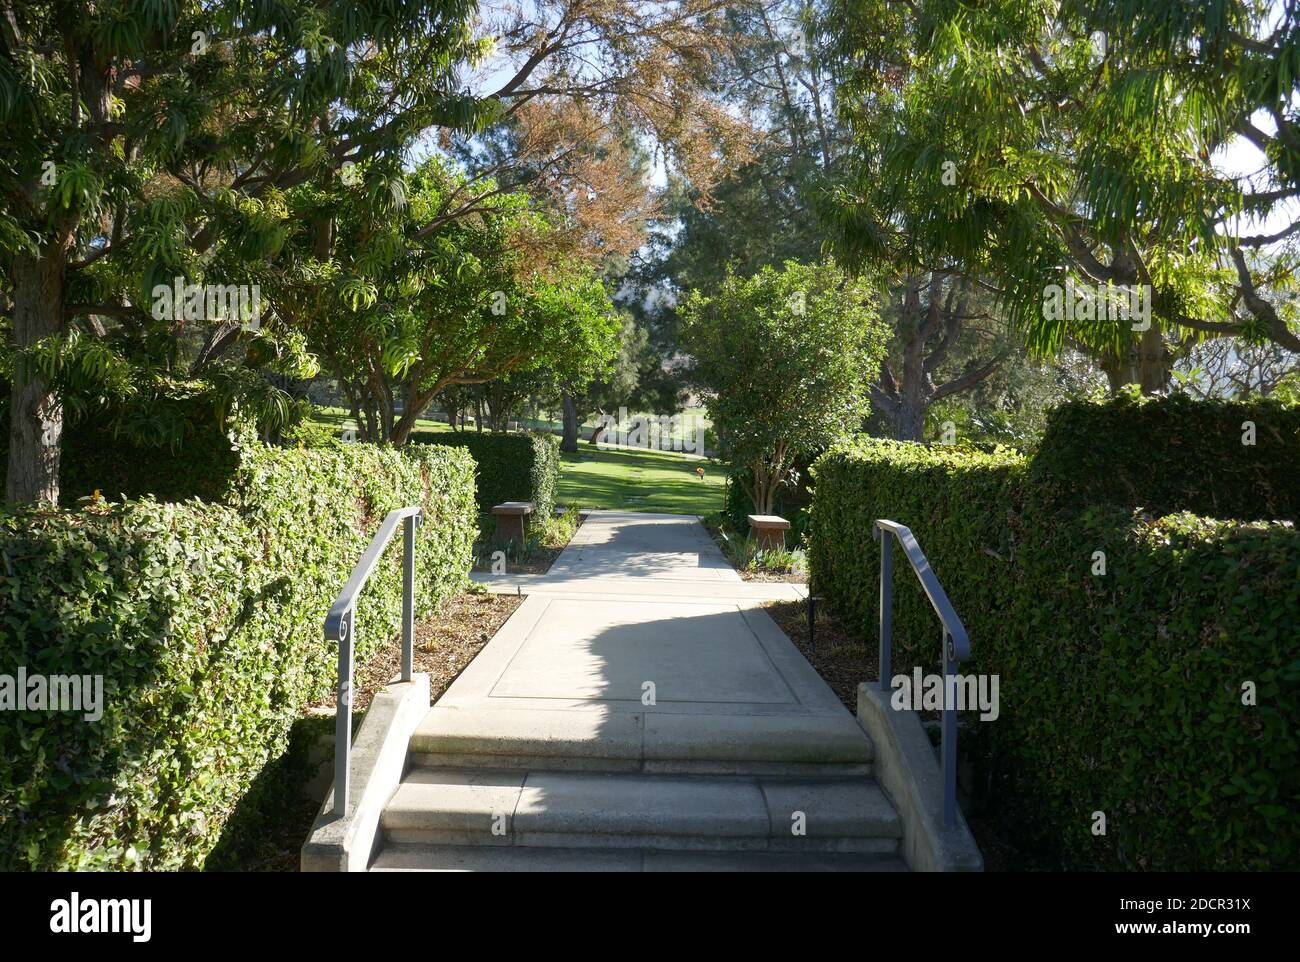 Los Angeles, California, USA 17th November 2020 A general view of atmosphere of Mount Sinai Cemetery Hollywood Hills on November 17, 2020 in Los Angeles, California, USA. Photo by Barry King/Alamy Stock Photo Stock Photo